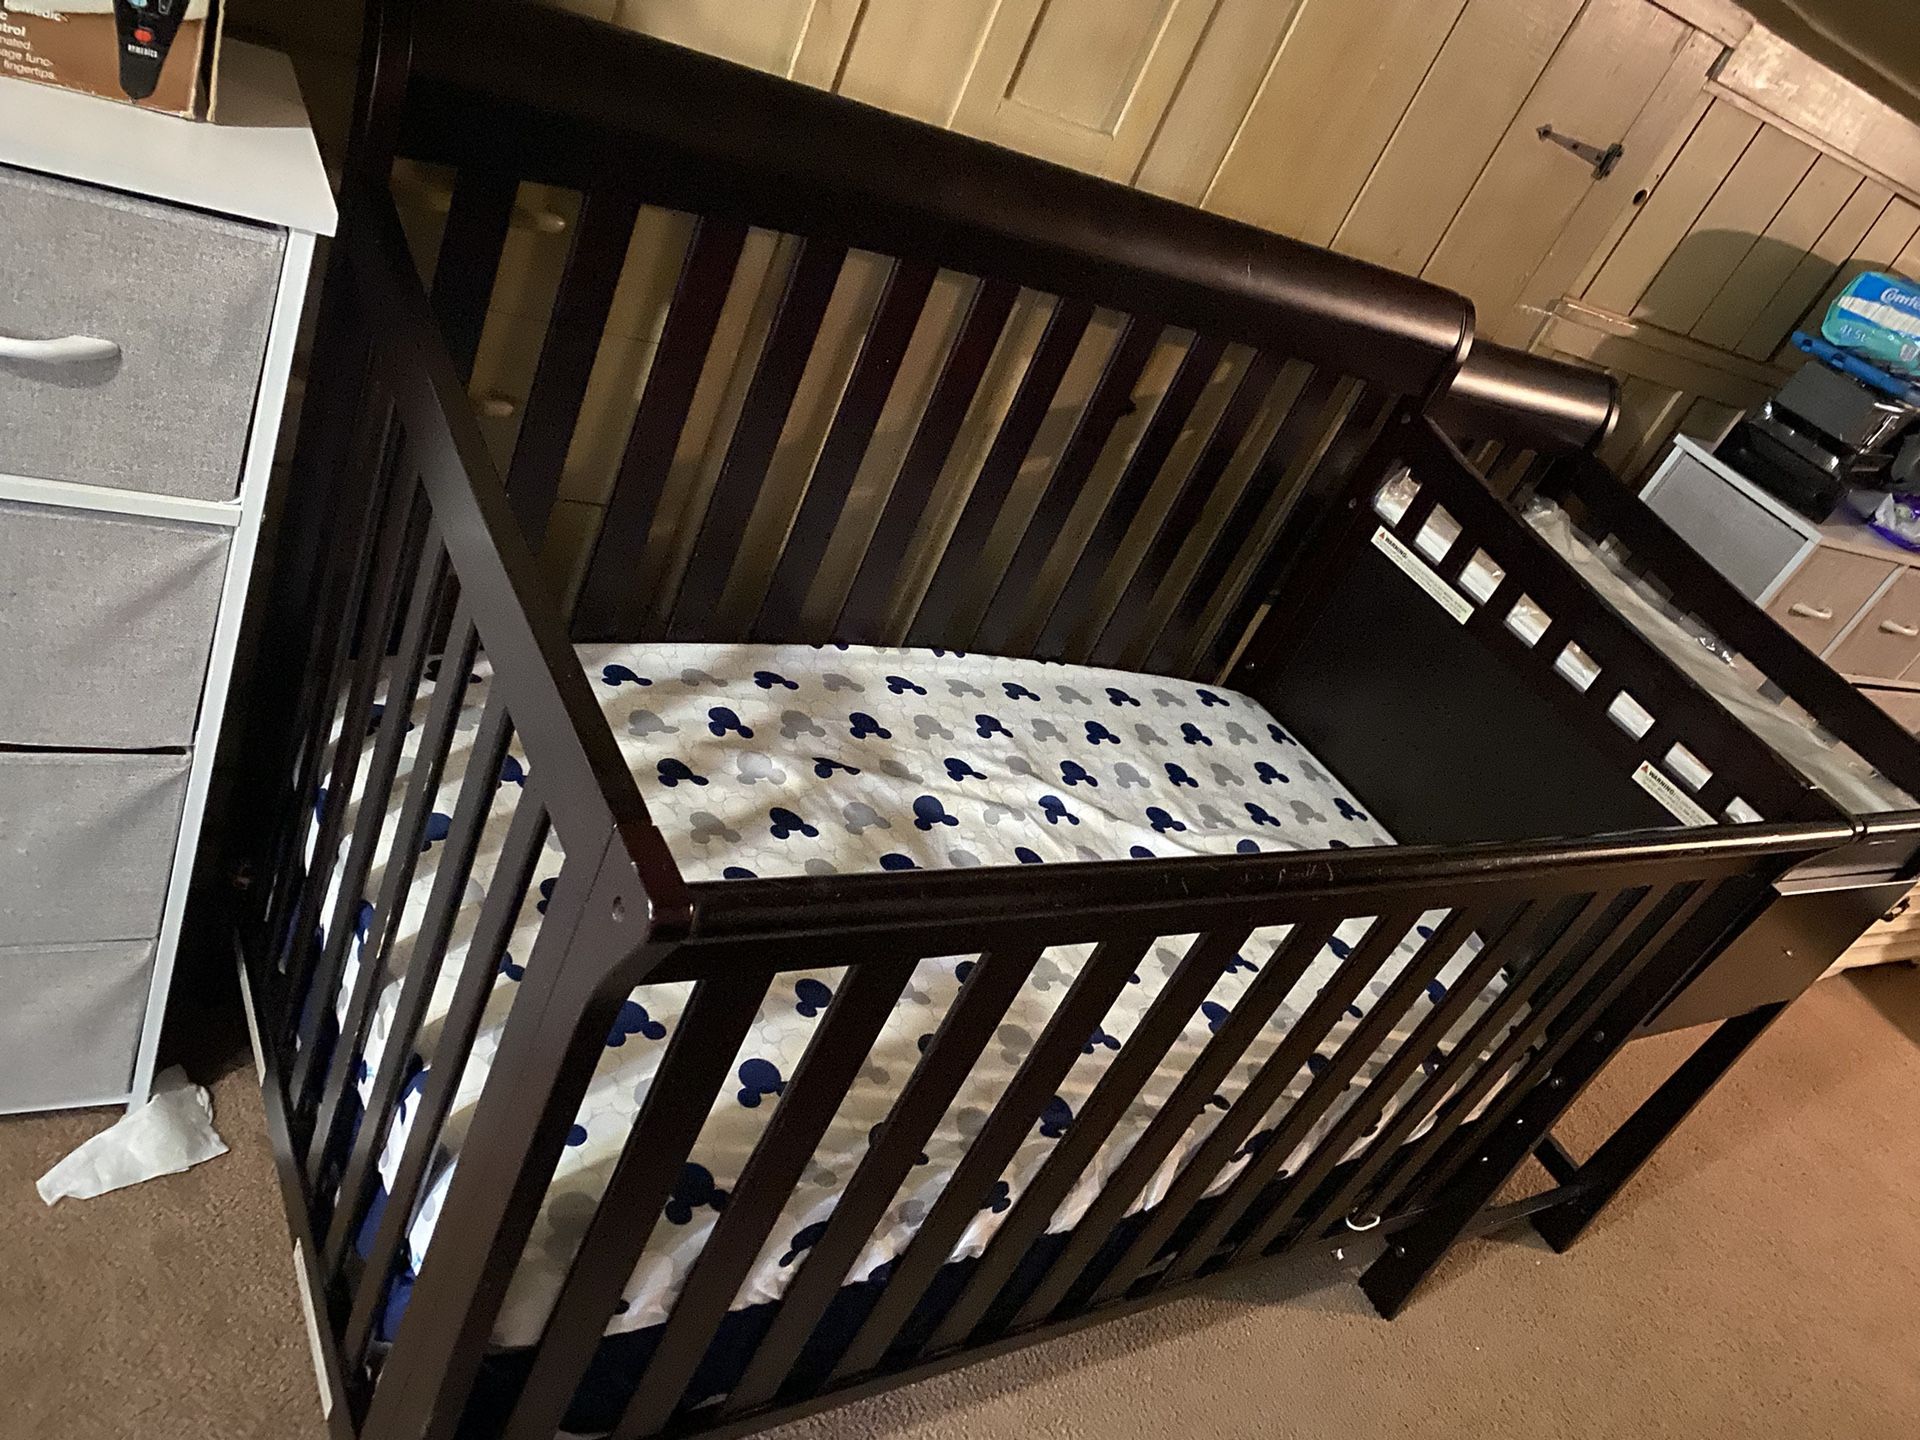 Baby Crib With Changing Table